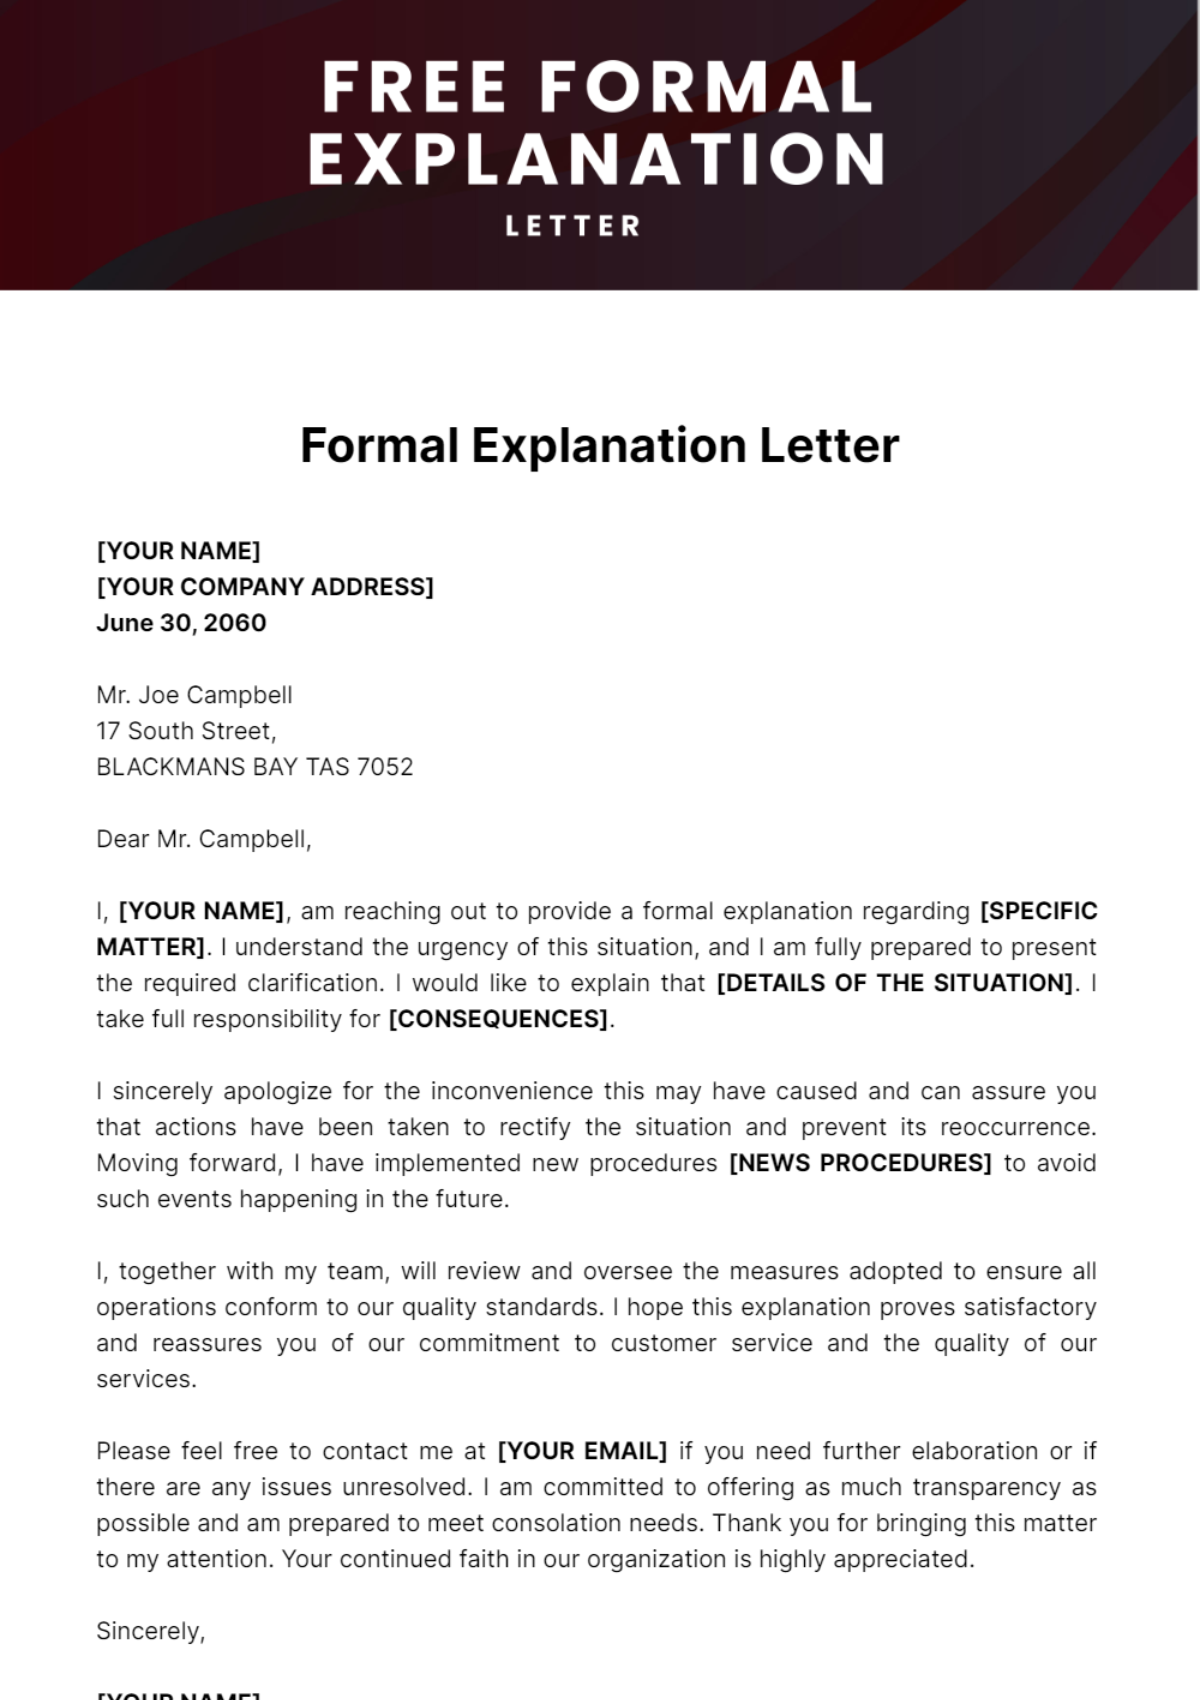 Free Formal Explanation Letter Template